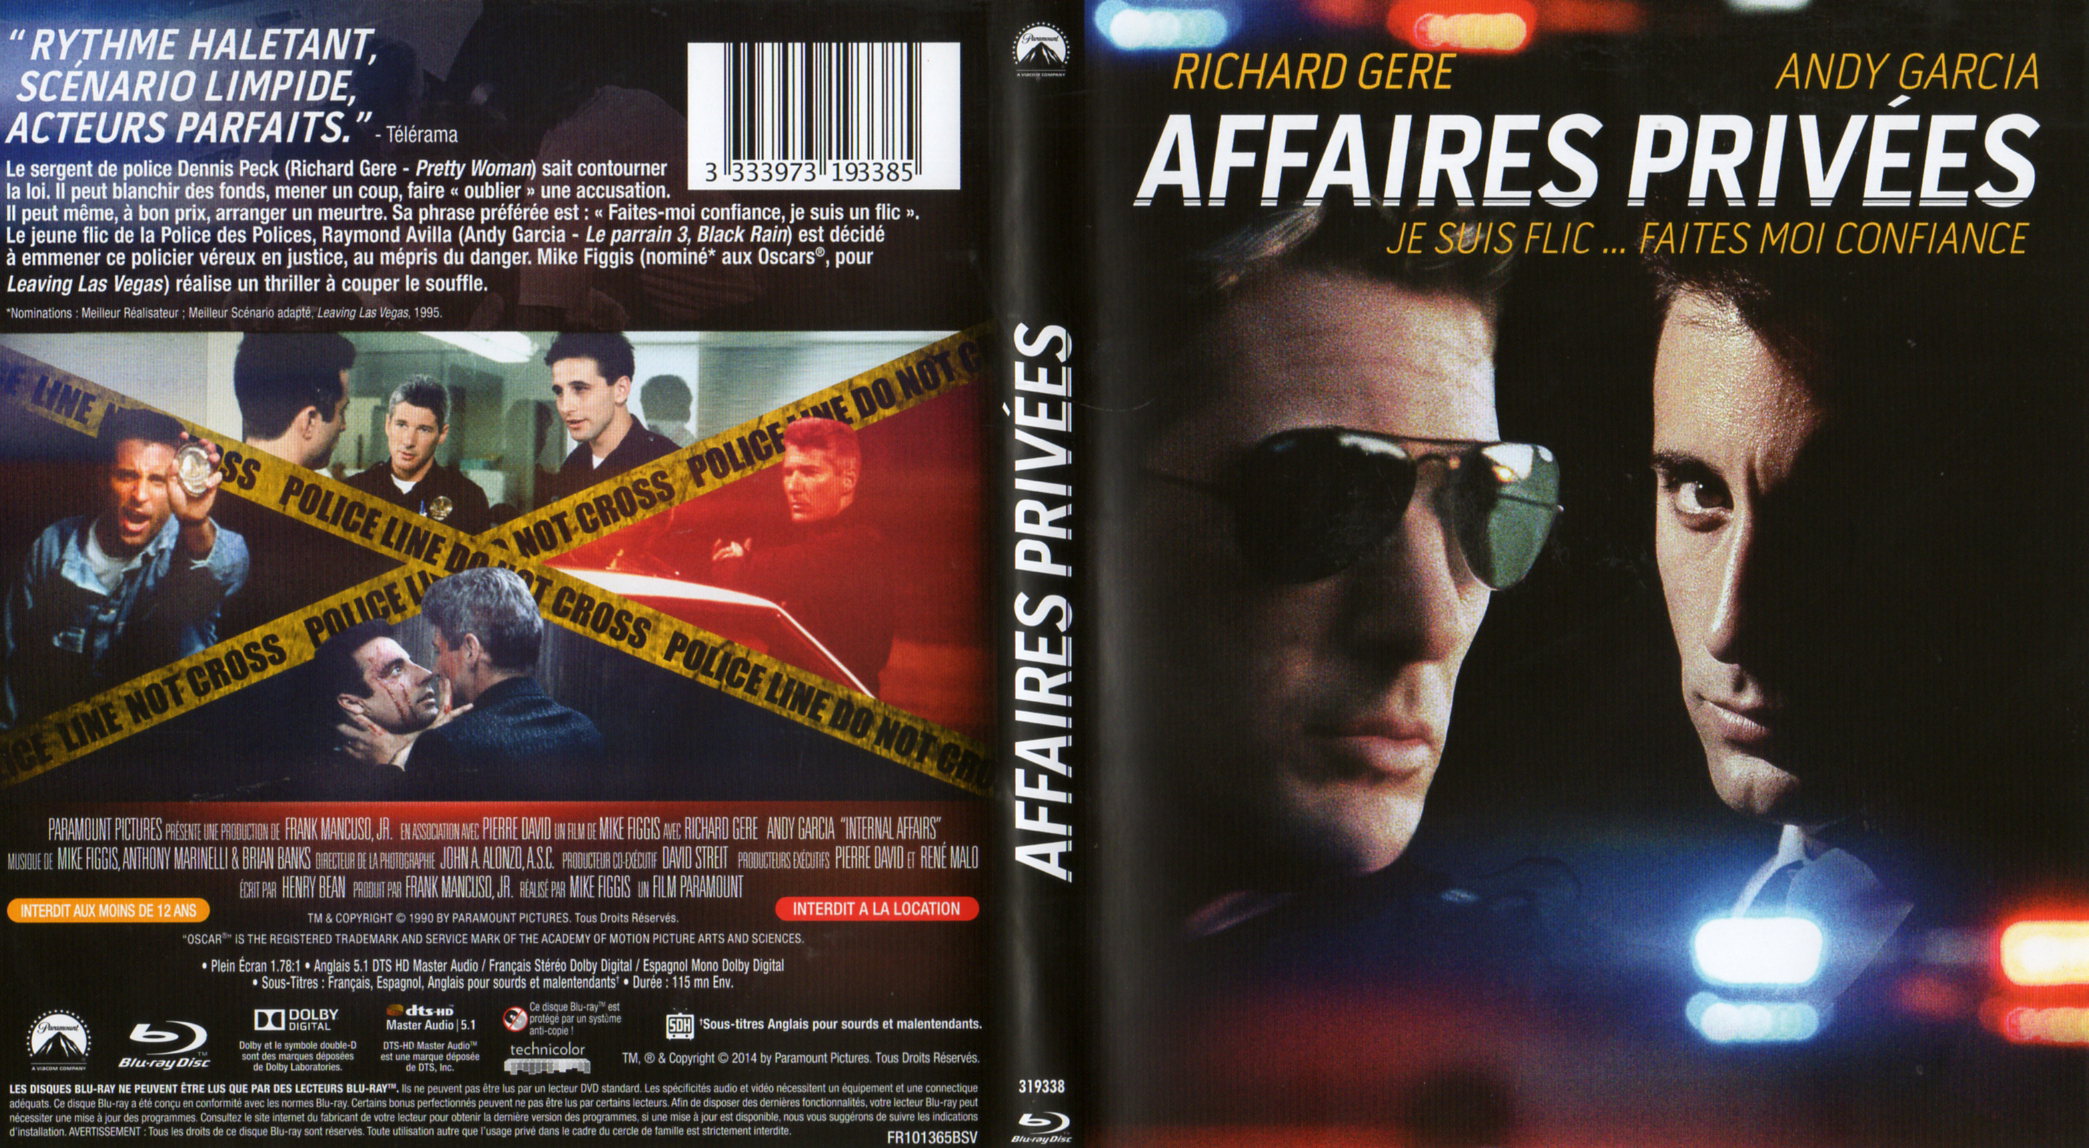 Jaquette DVD Affaires prives (BLU-RAY)